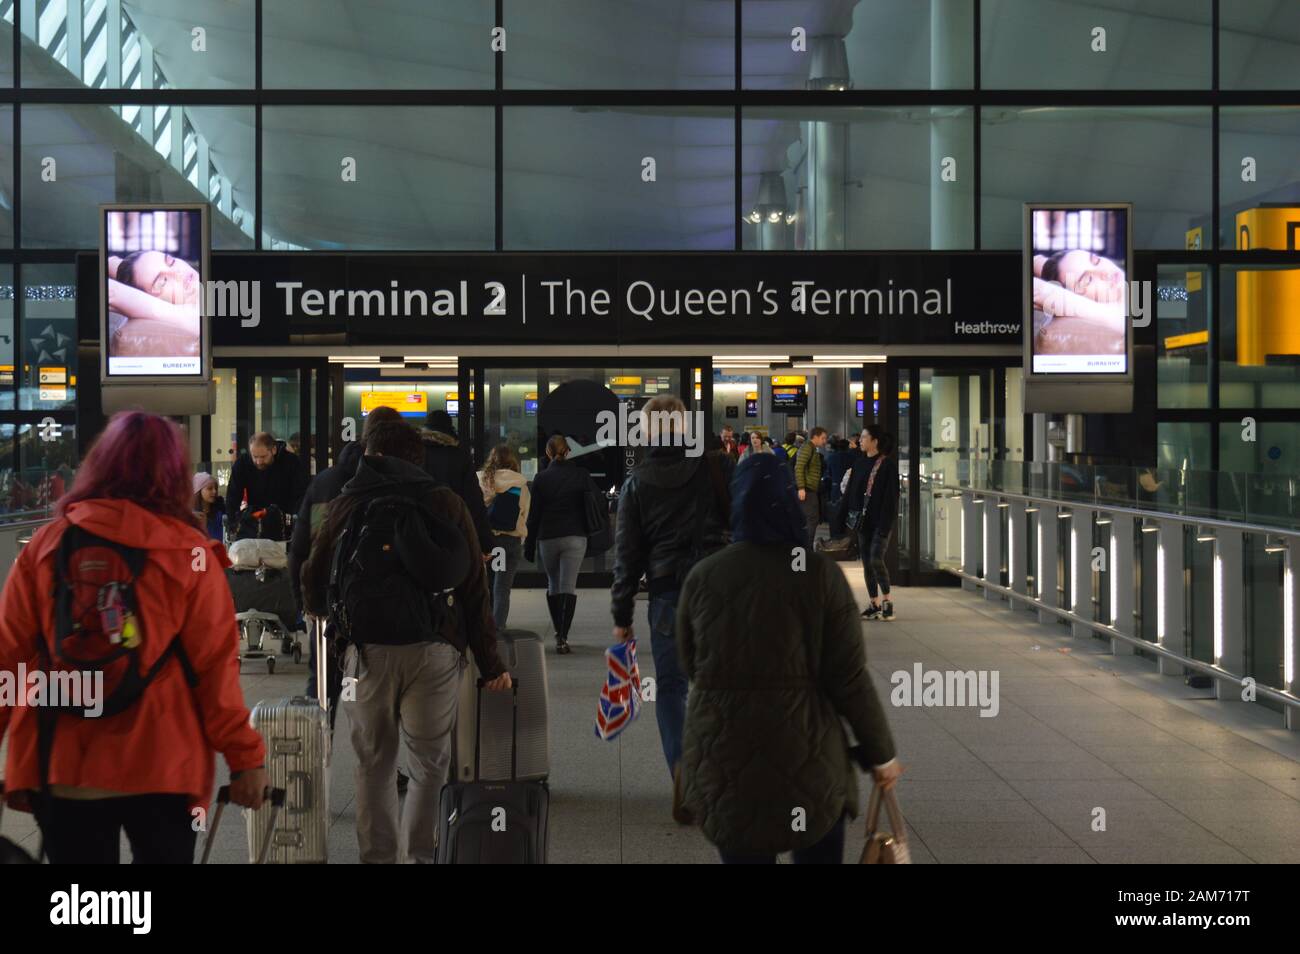 London, UK. 5 January, 2020. Terminal 2 (The Queen's Terminal) of London Heathrow airport in United Kingdom. Stock Photo